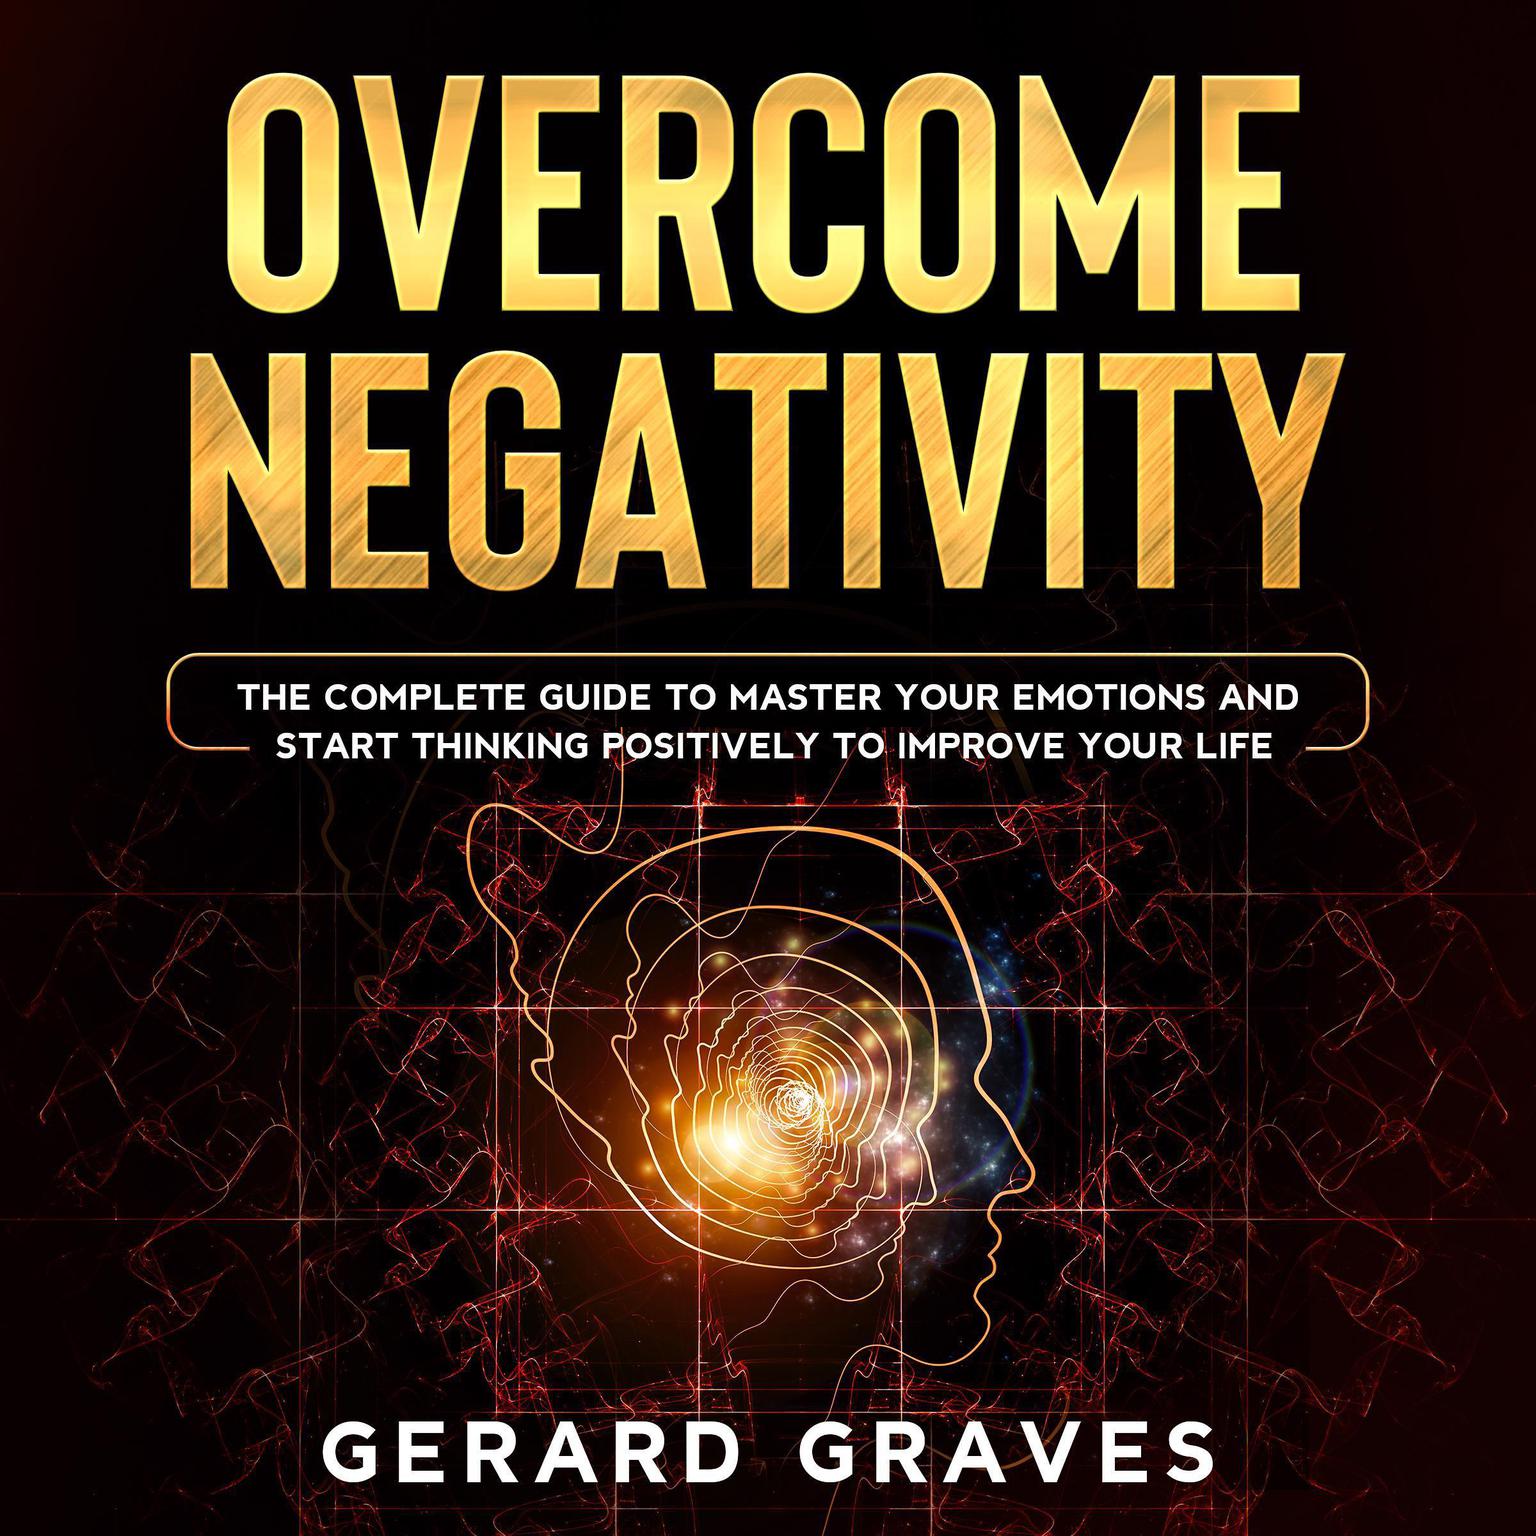 Overcome Negativity: The Complete Guide to Master Your Emotions and Start Thinking Positively to Improve Your Life Audiobook, by Gerard Graves